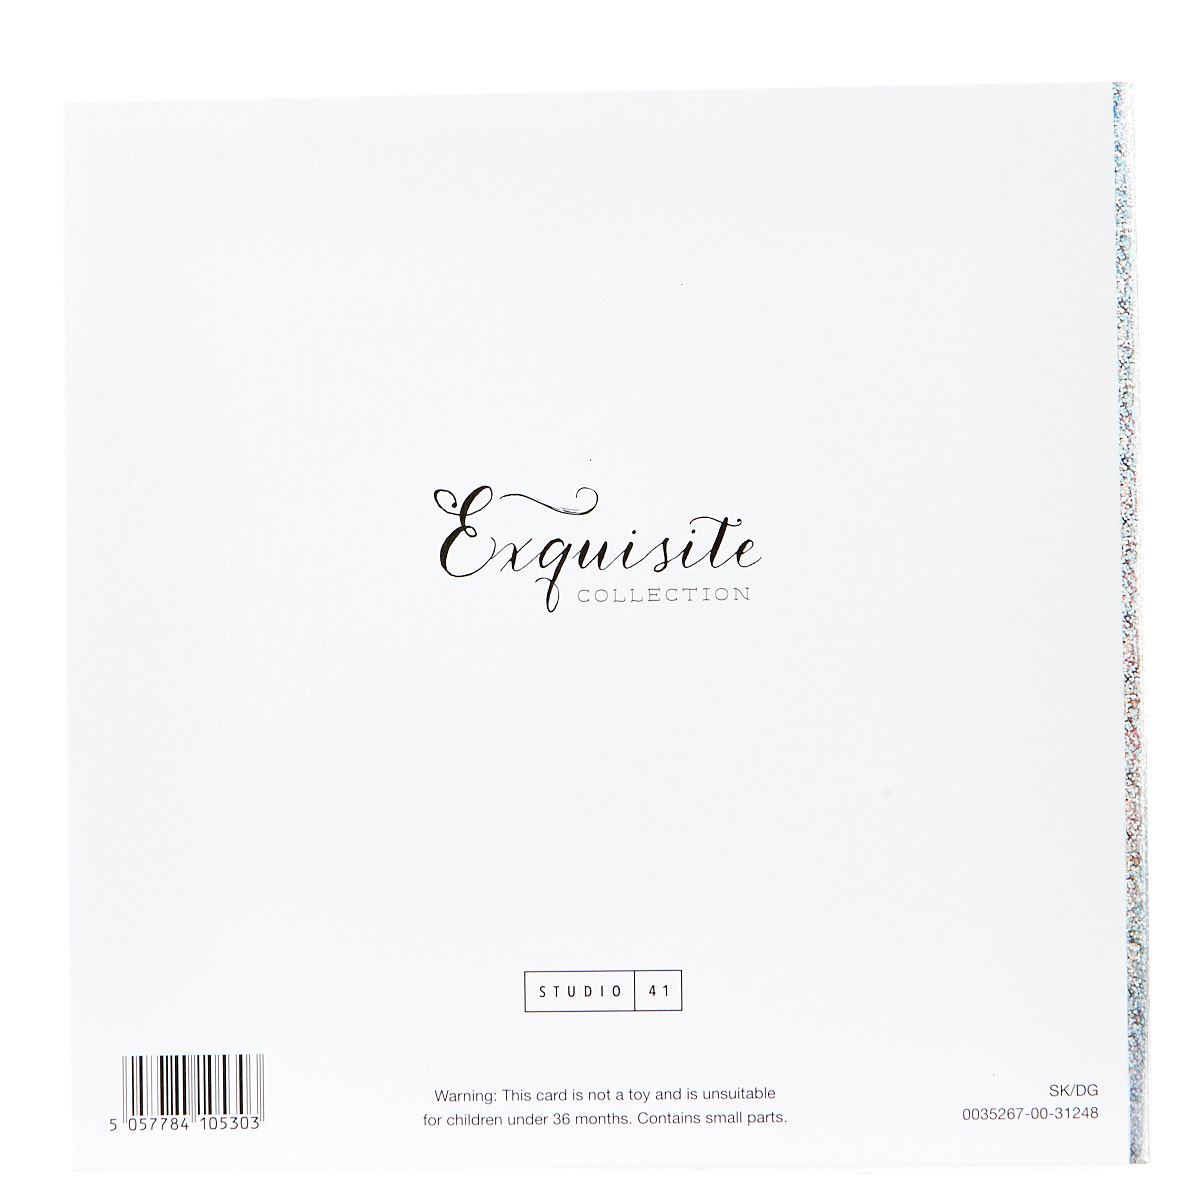 Exquisite Collection 50th Birthday Card - Any Male Recipient (Stickers Included)